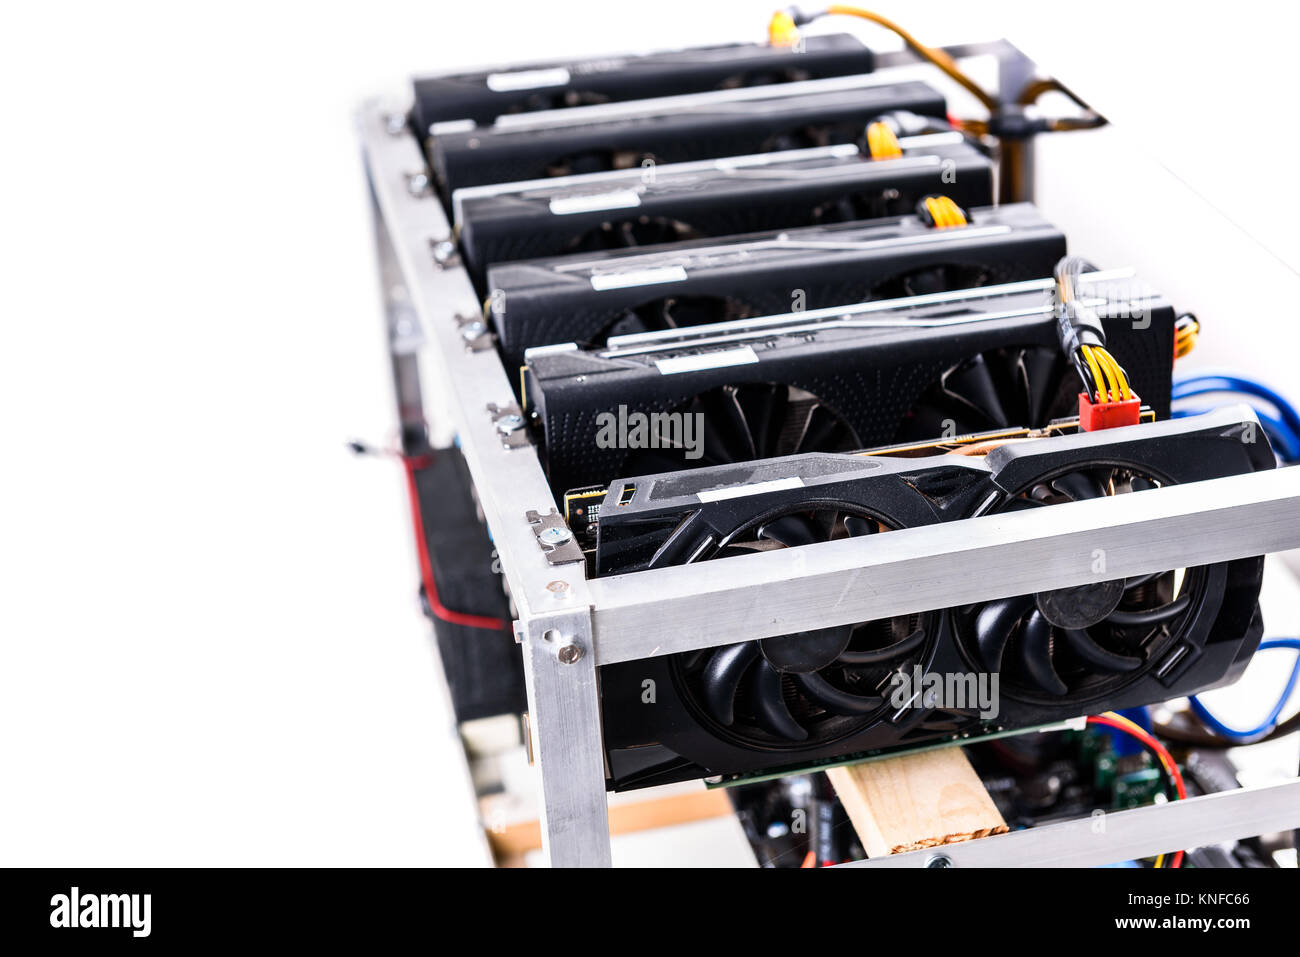 Cryptocurrency bitcoin ethereum altcoin graphic card miner mining rig. Home  made crypto currency mining equipement in aluminium case with motherboard  Stock Photo - Alamy